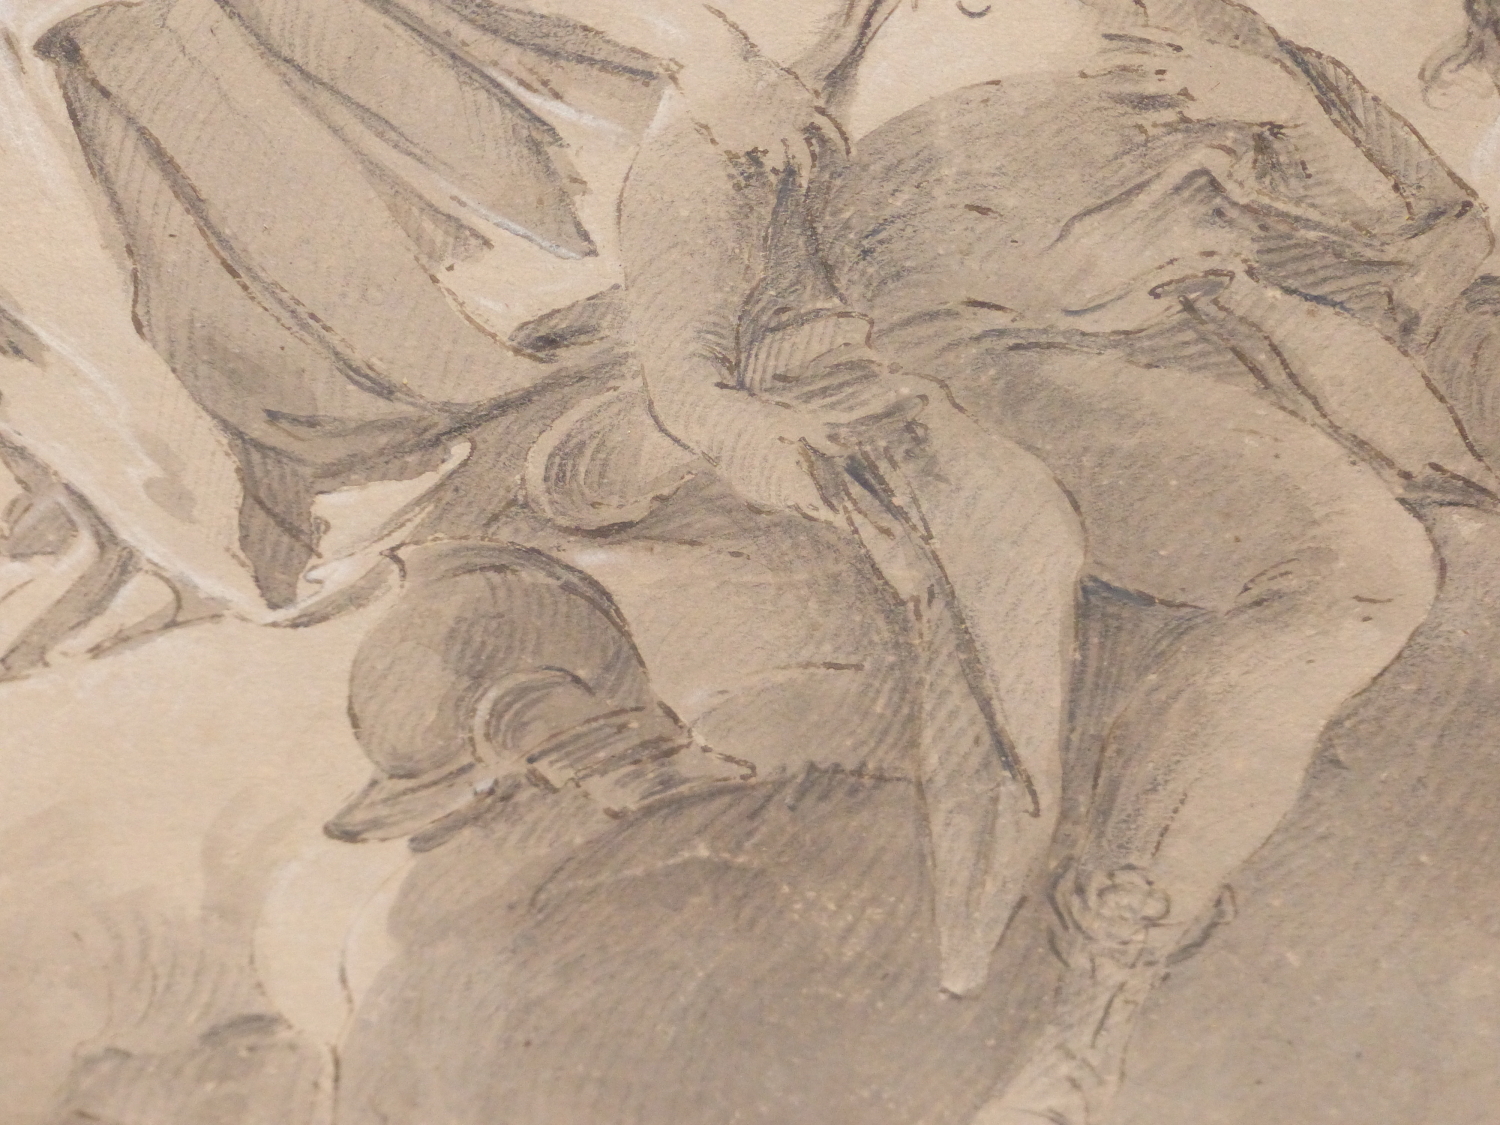 AFTER GIOVANNI TIEPOLO, AN 18TH/ 19TH FIGURE STUDY, GREY WASH, PENCIL AND CHALK ON PAPER, BEARS - Image 5 of 9